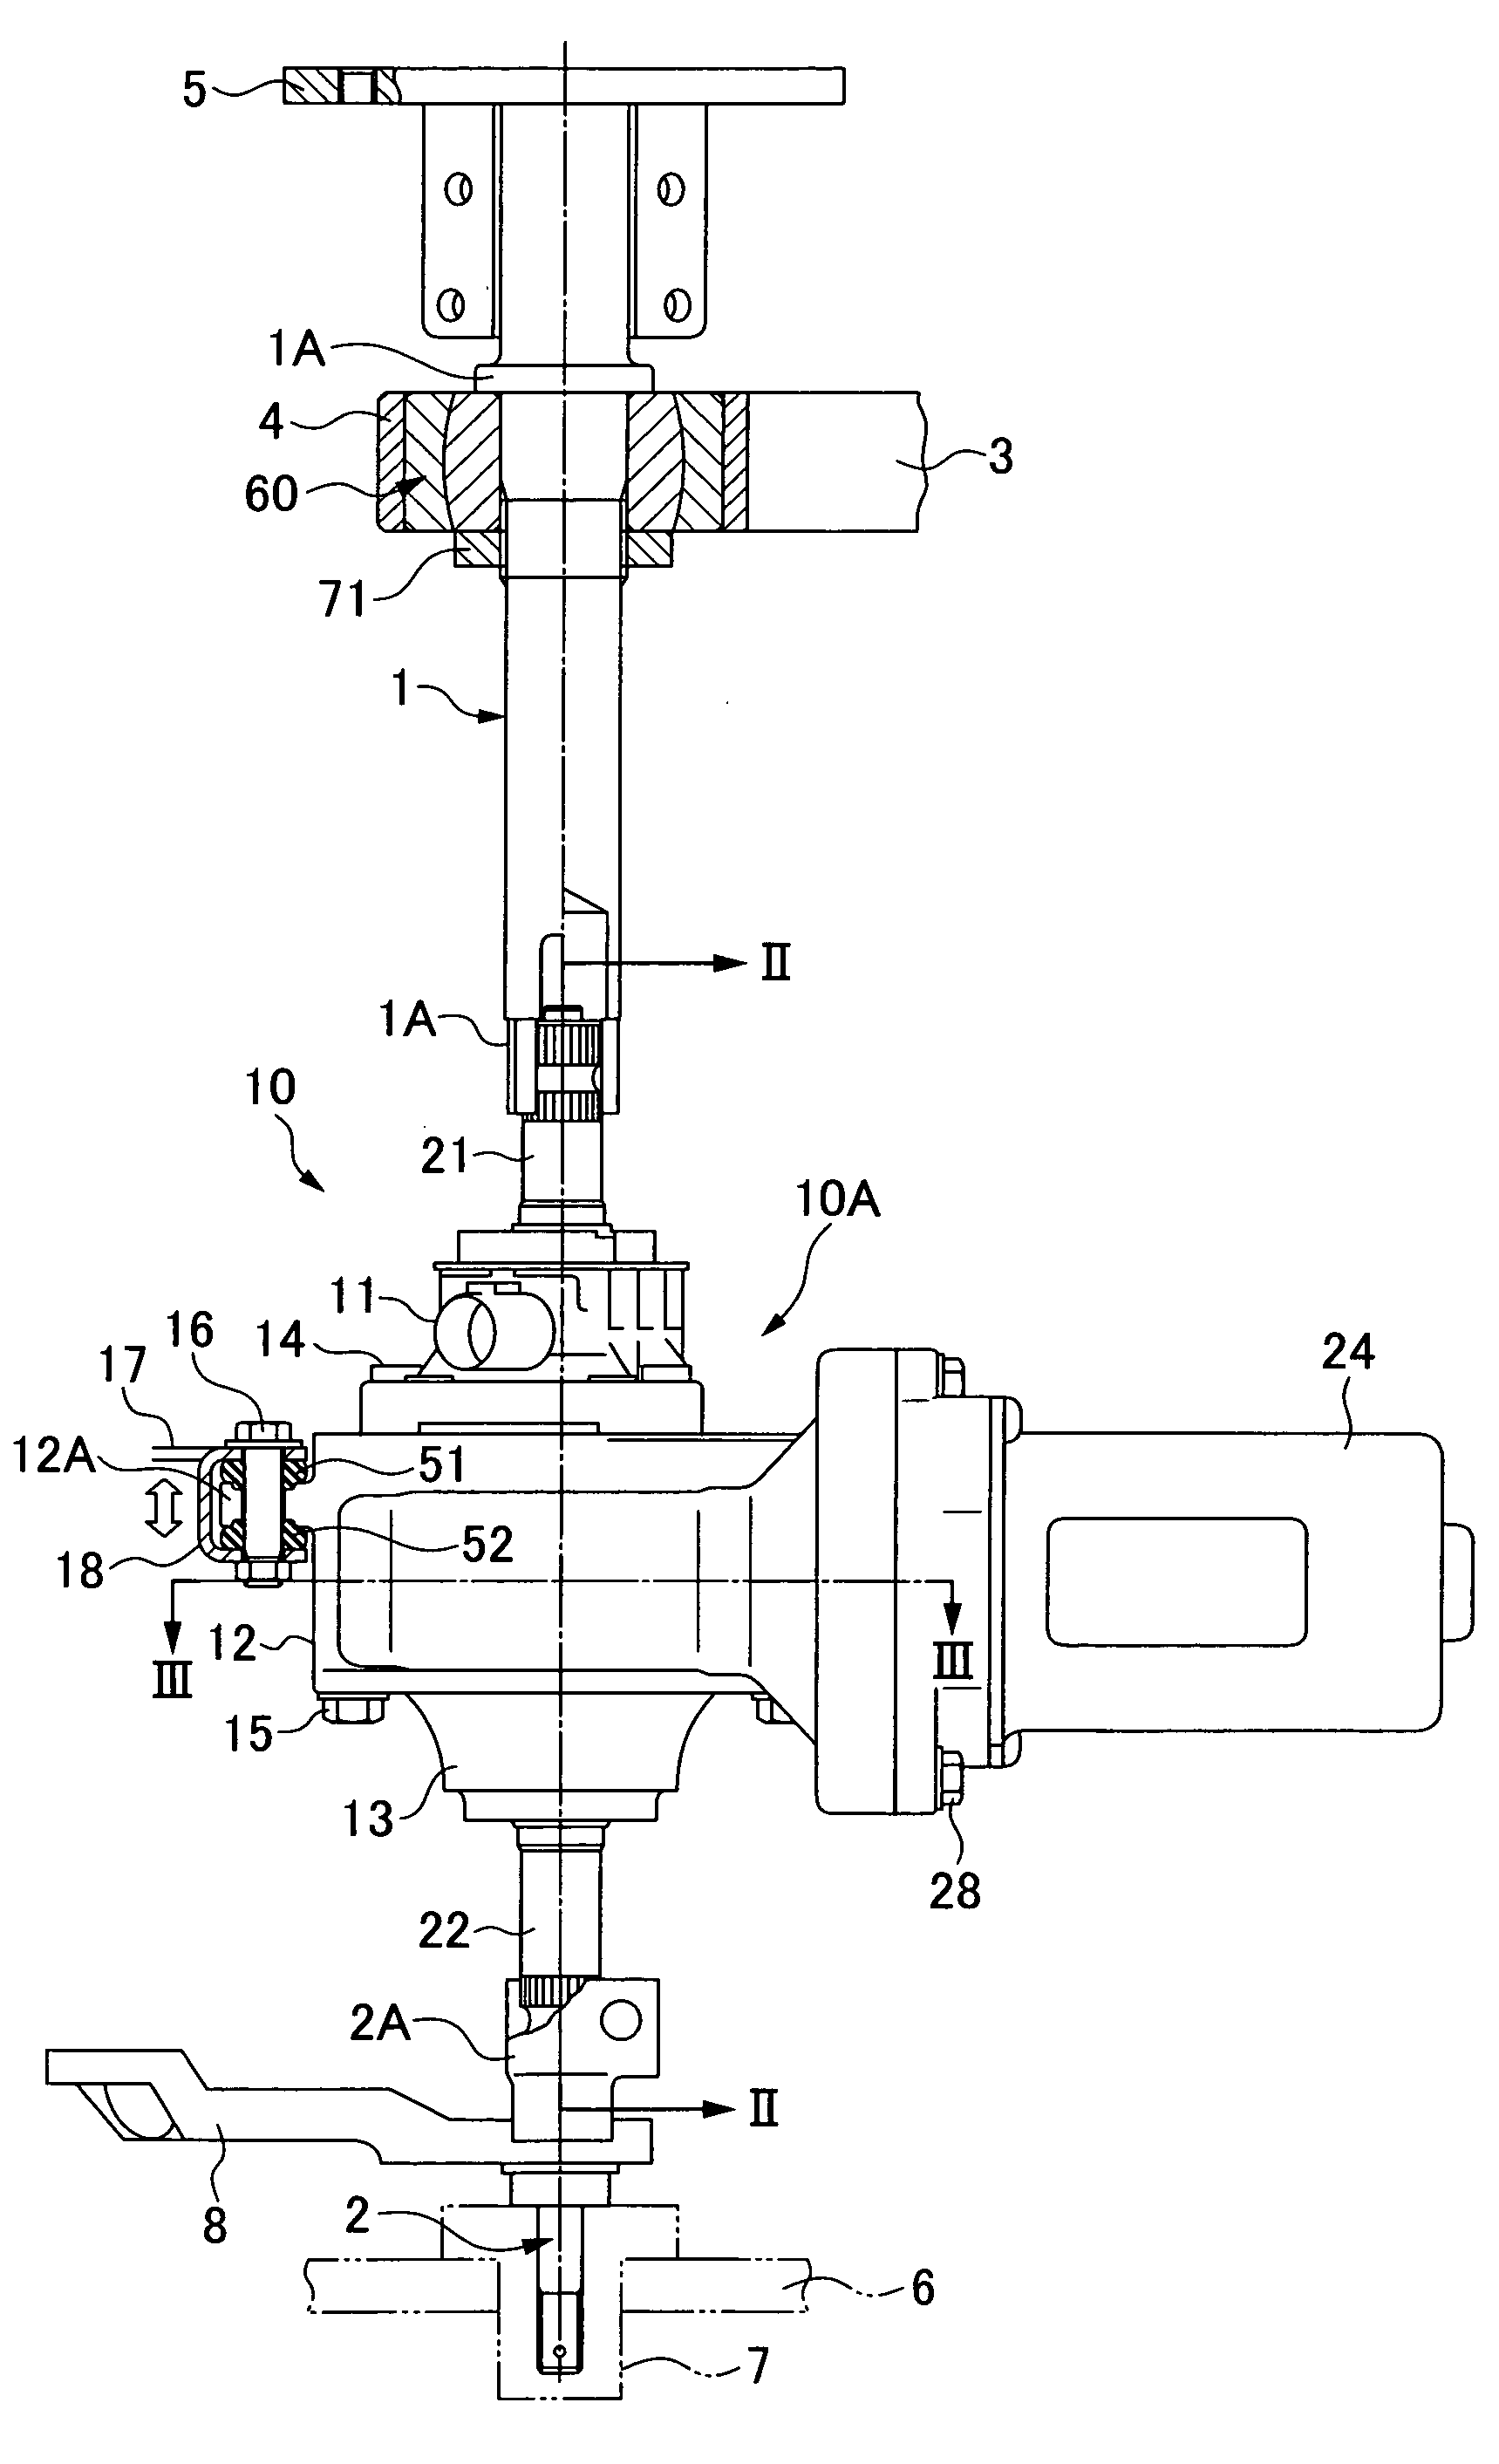 Steering shaft support structure of motor-driven steering assist apparatus